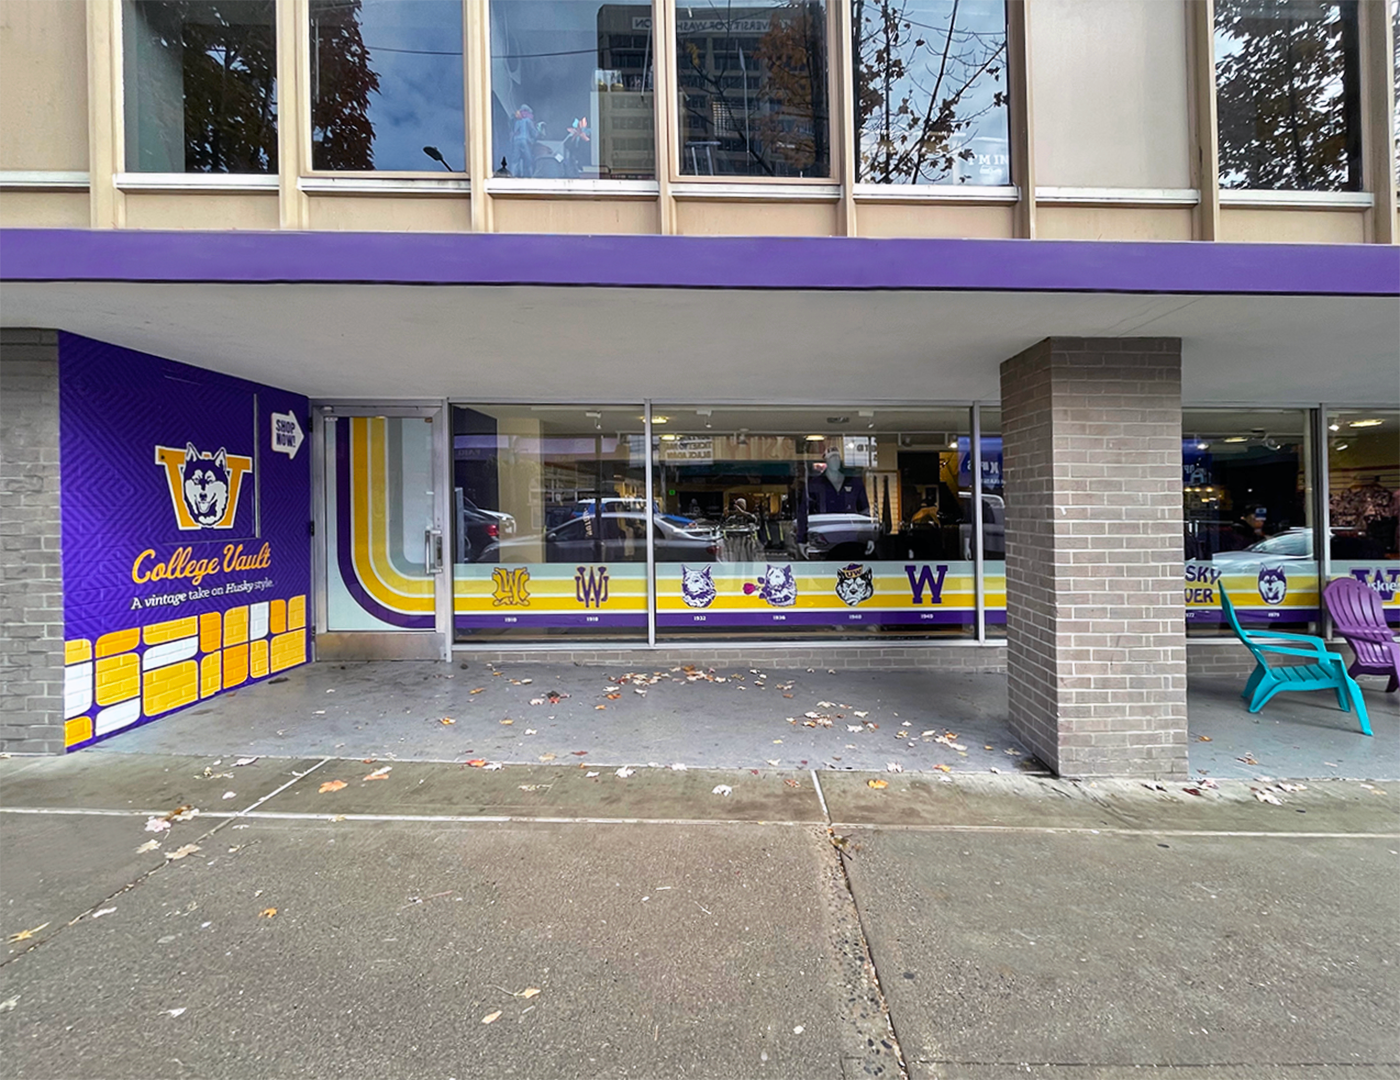 Outside image of University of Washington's bookstore that showcases wall graphic and window graphics with school crests throughout it's history.